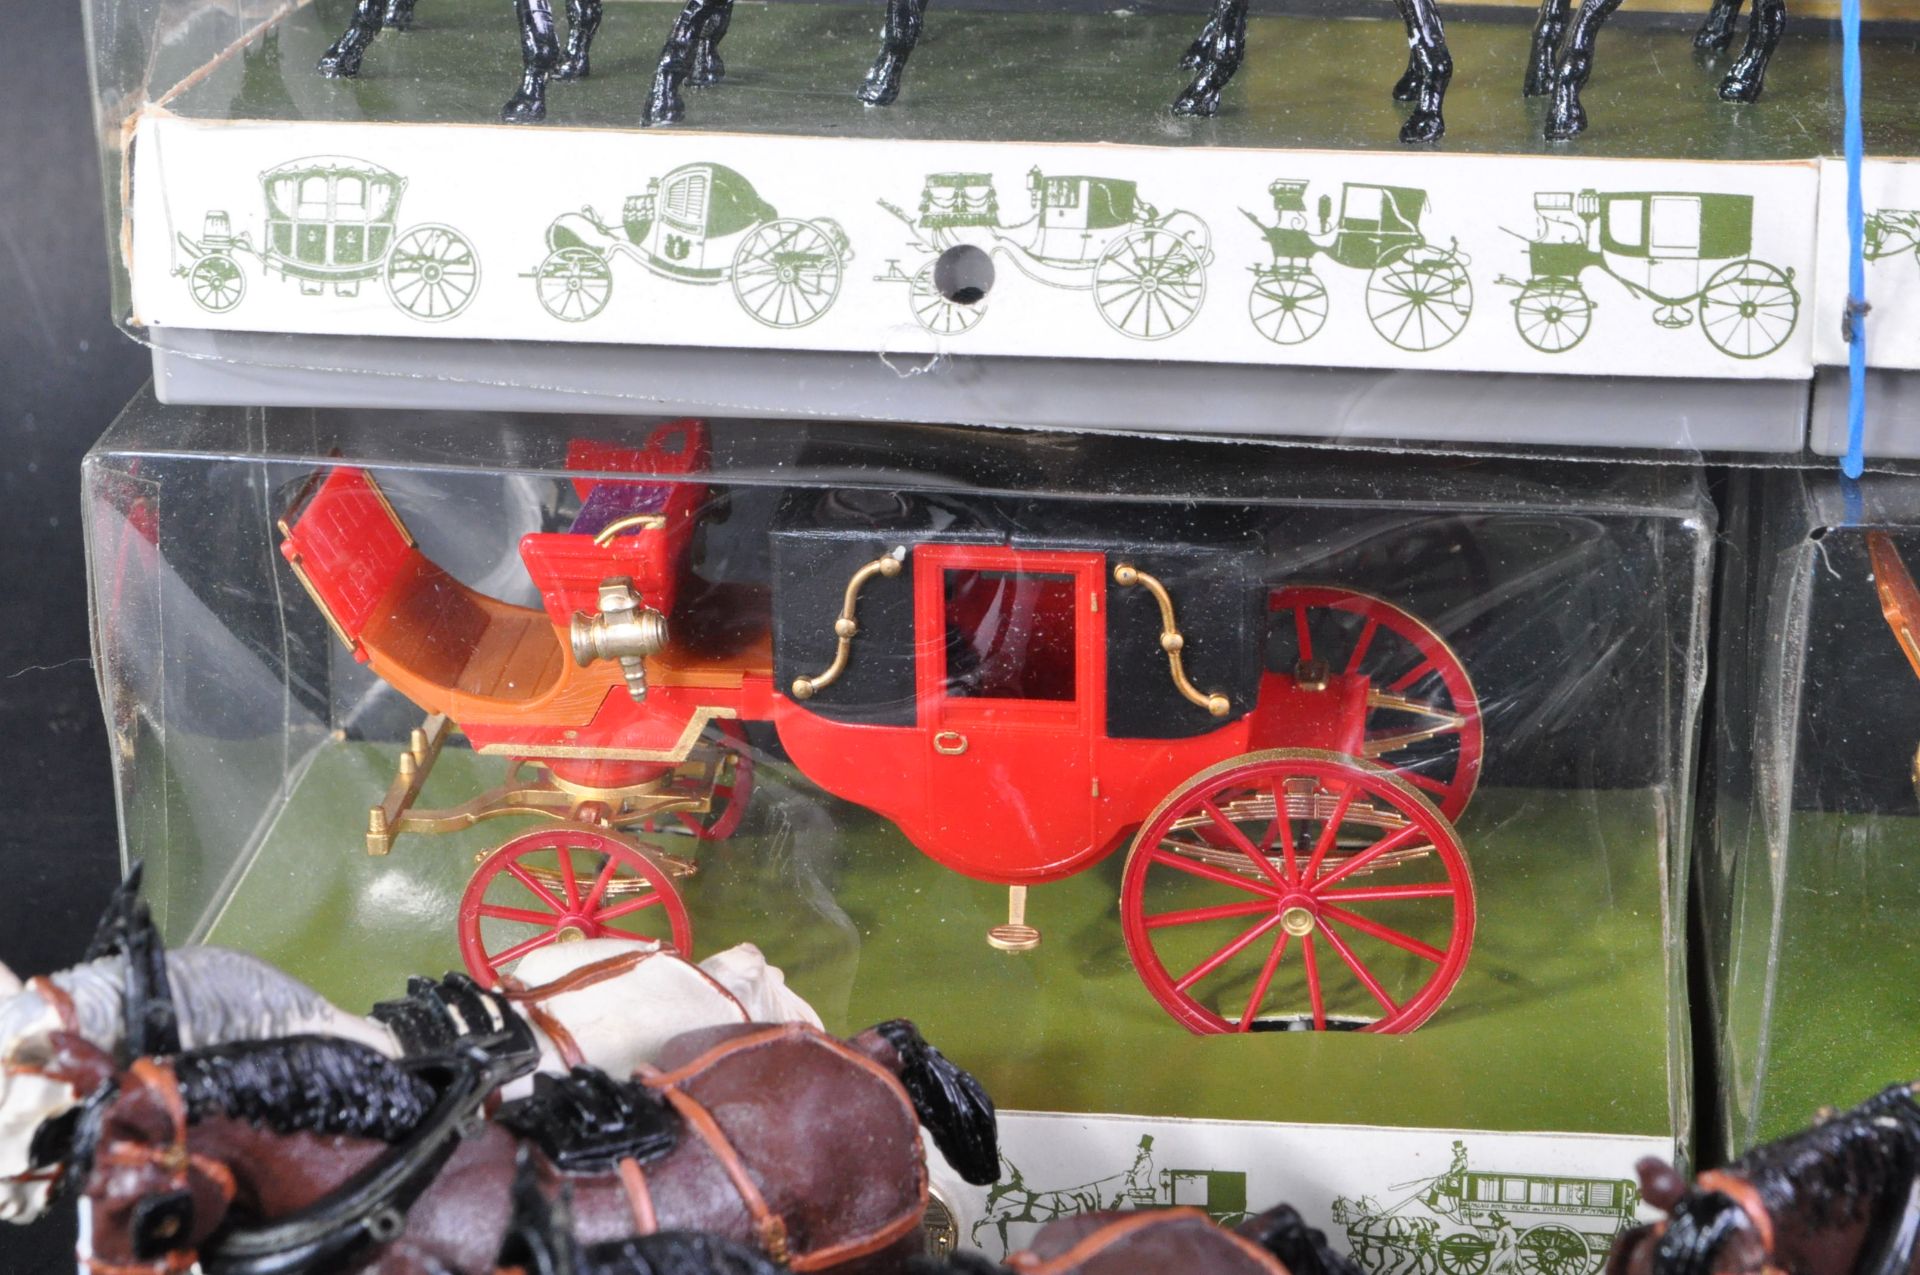 VINTAGE BRUMM 1/43 SCALE HORSE DRAWN CARRIAGES & BRITAIN'S HORSES - Image 6 of 6